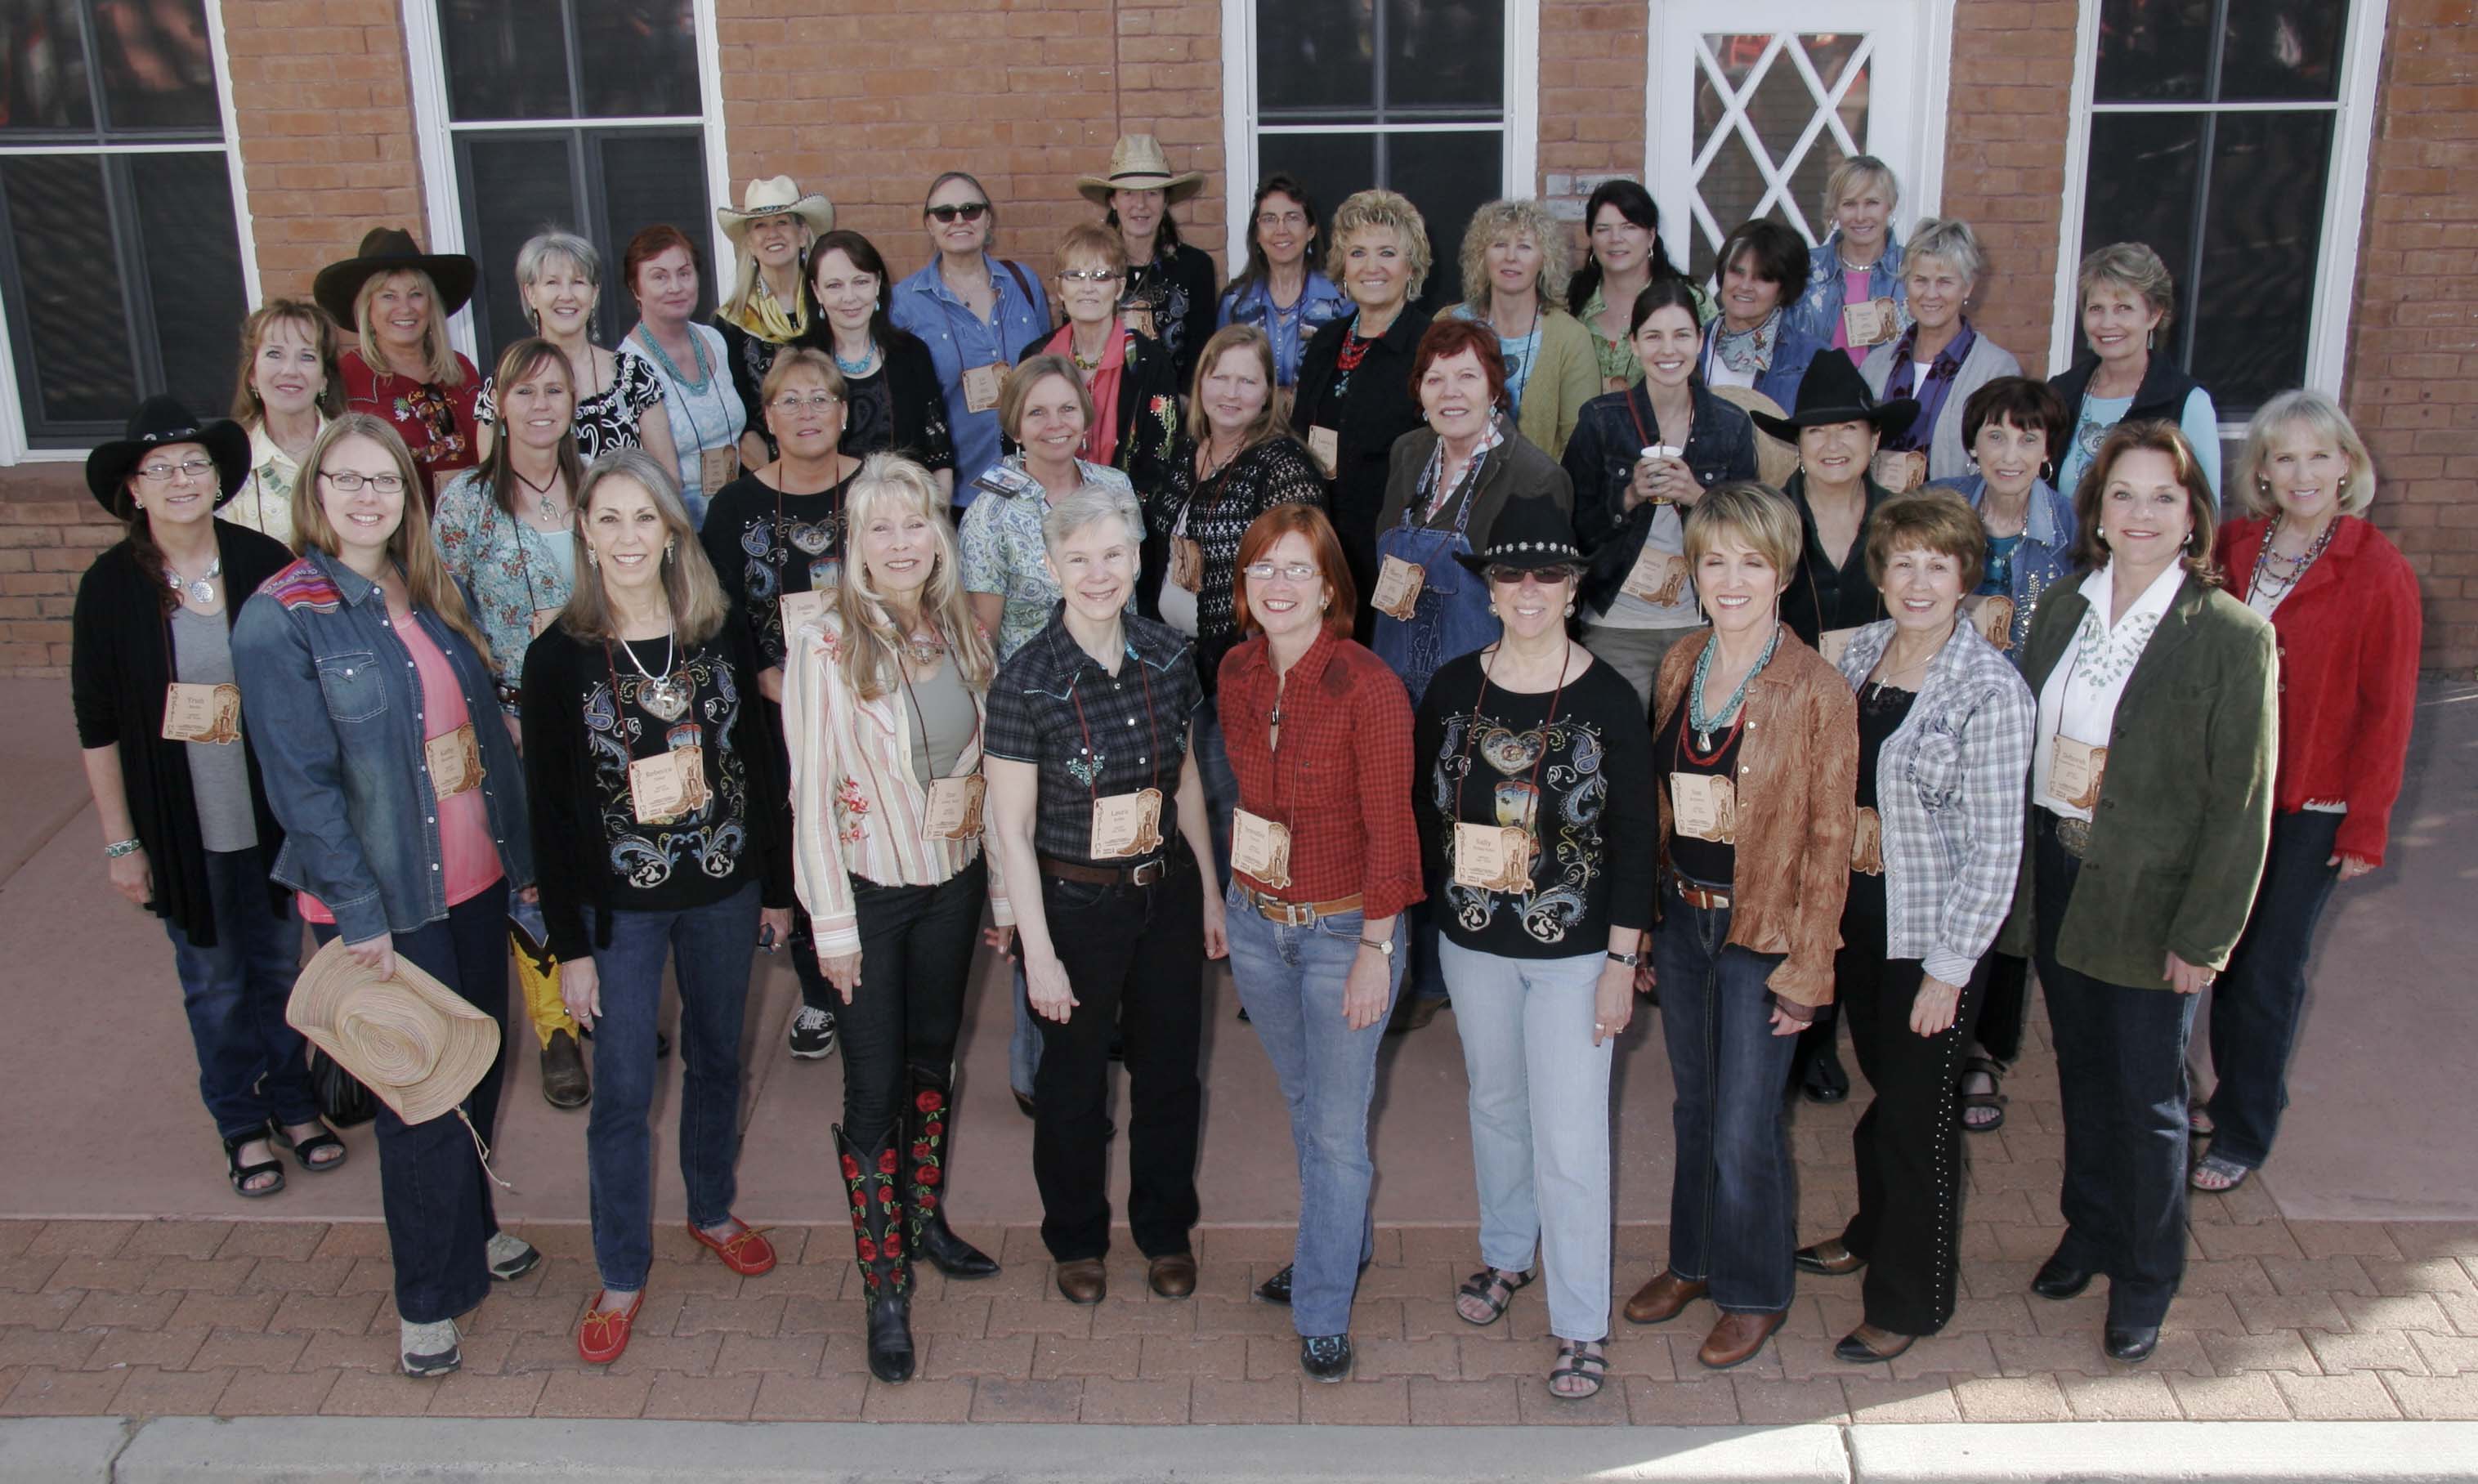 The 2014 Cowgirl Up! artists at the annual event